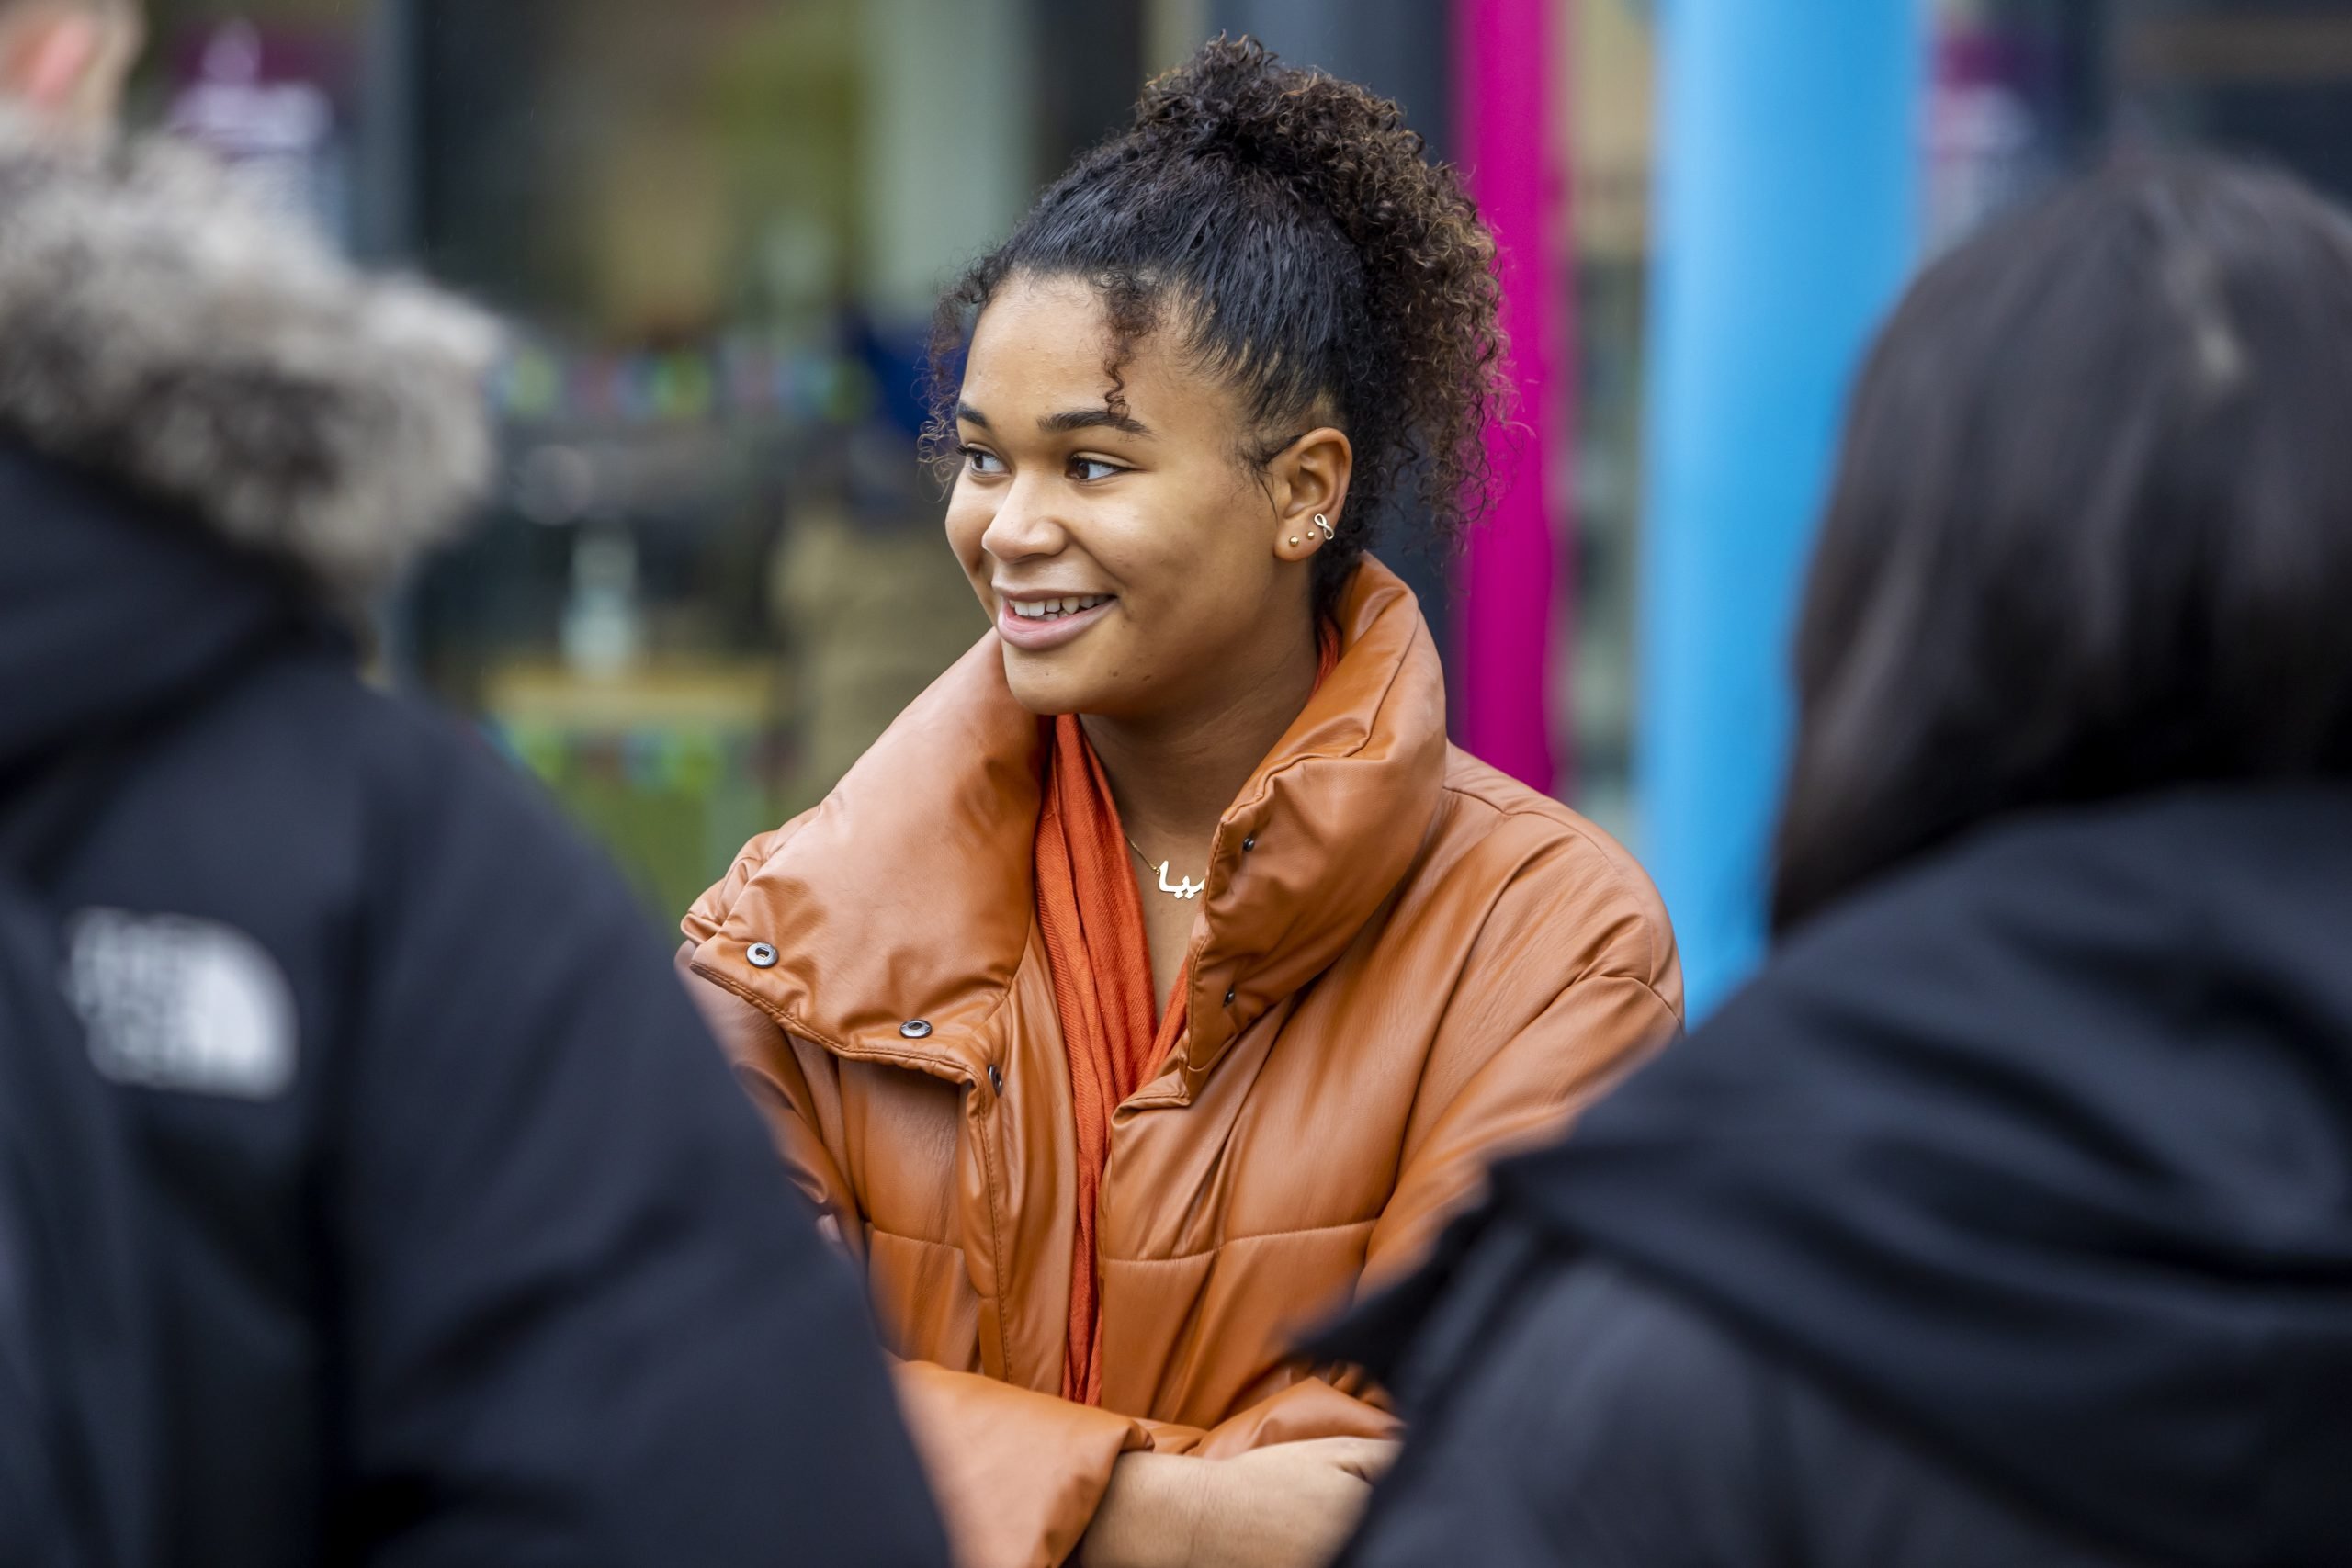 A young person is standing outside wearing an orange coat and smiling. They are thinking about when to come off antidepressants